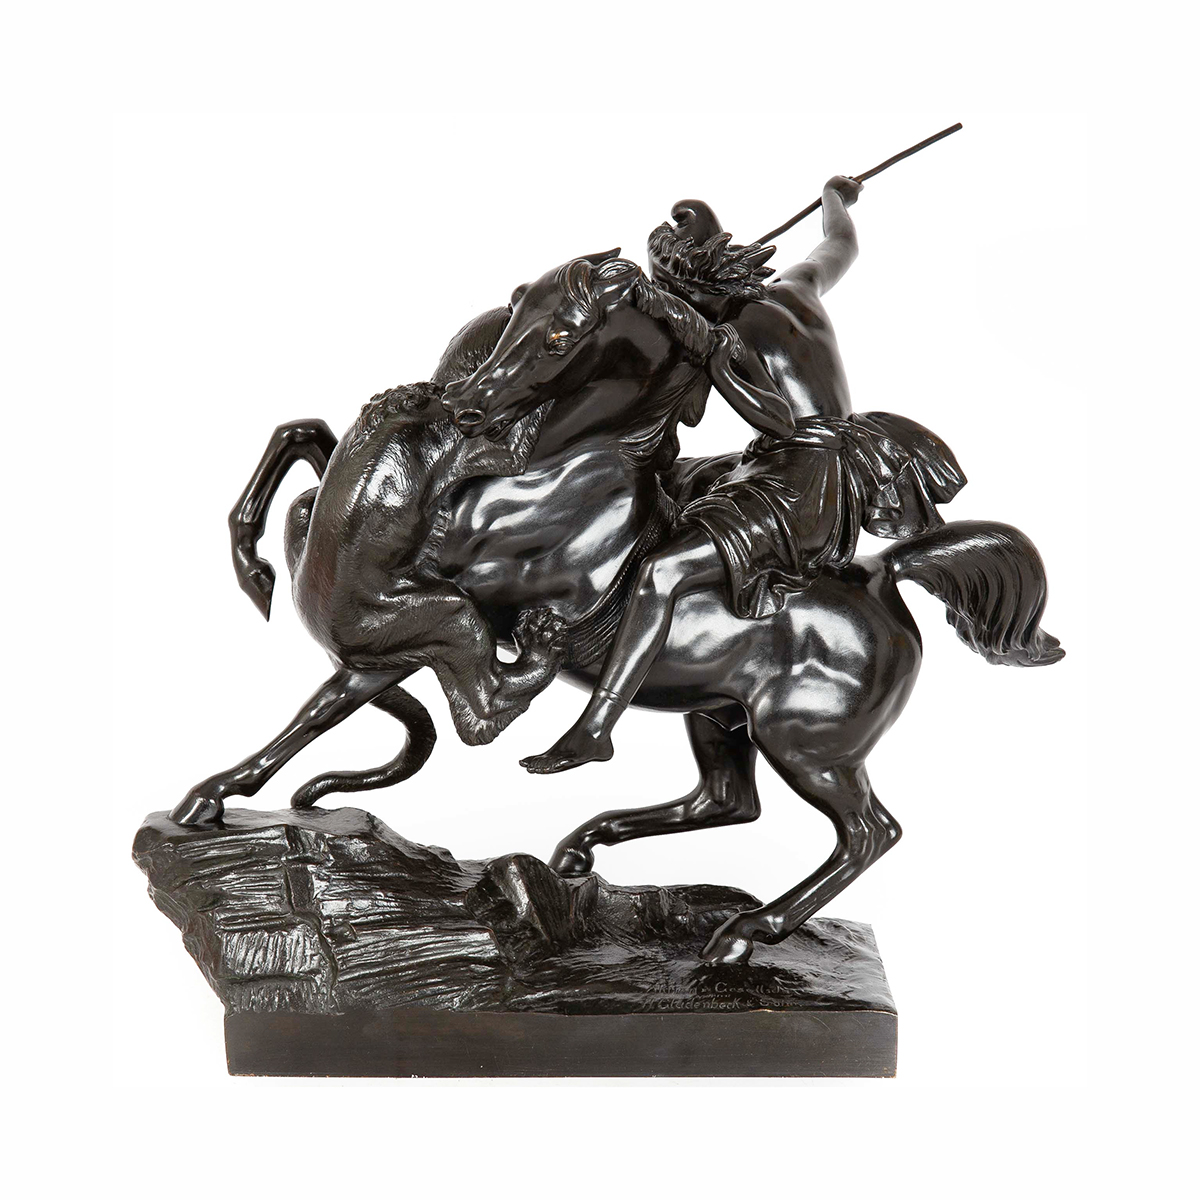 Statue Of Warrior on Horse